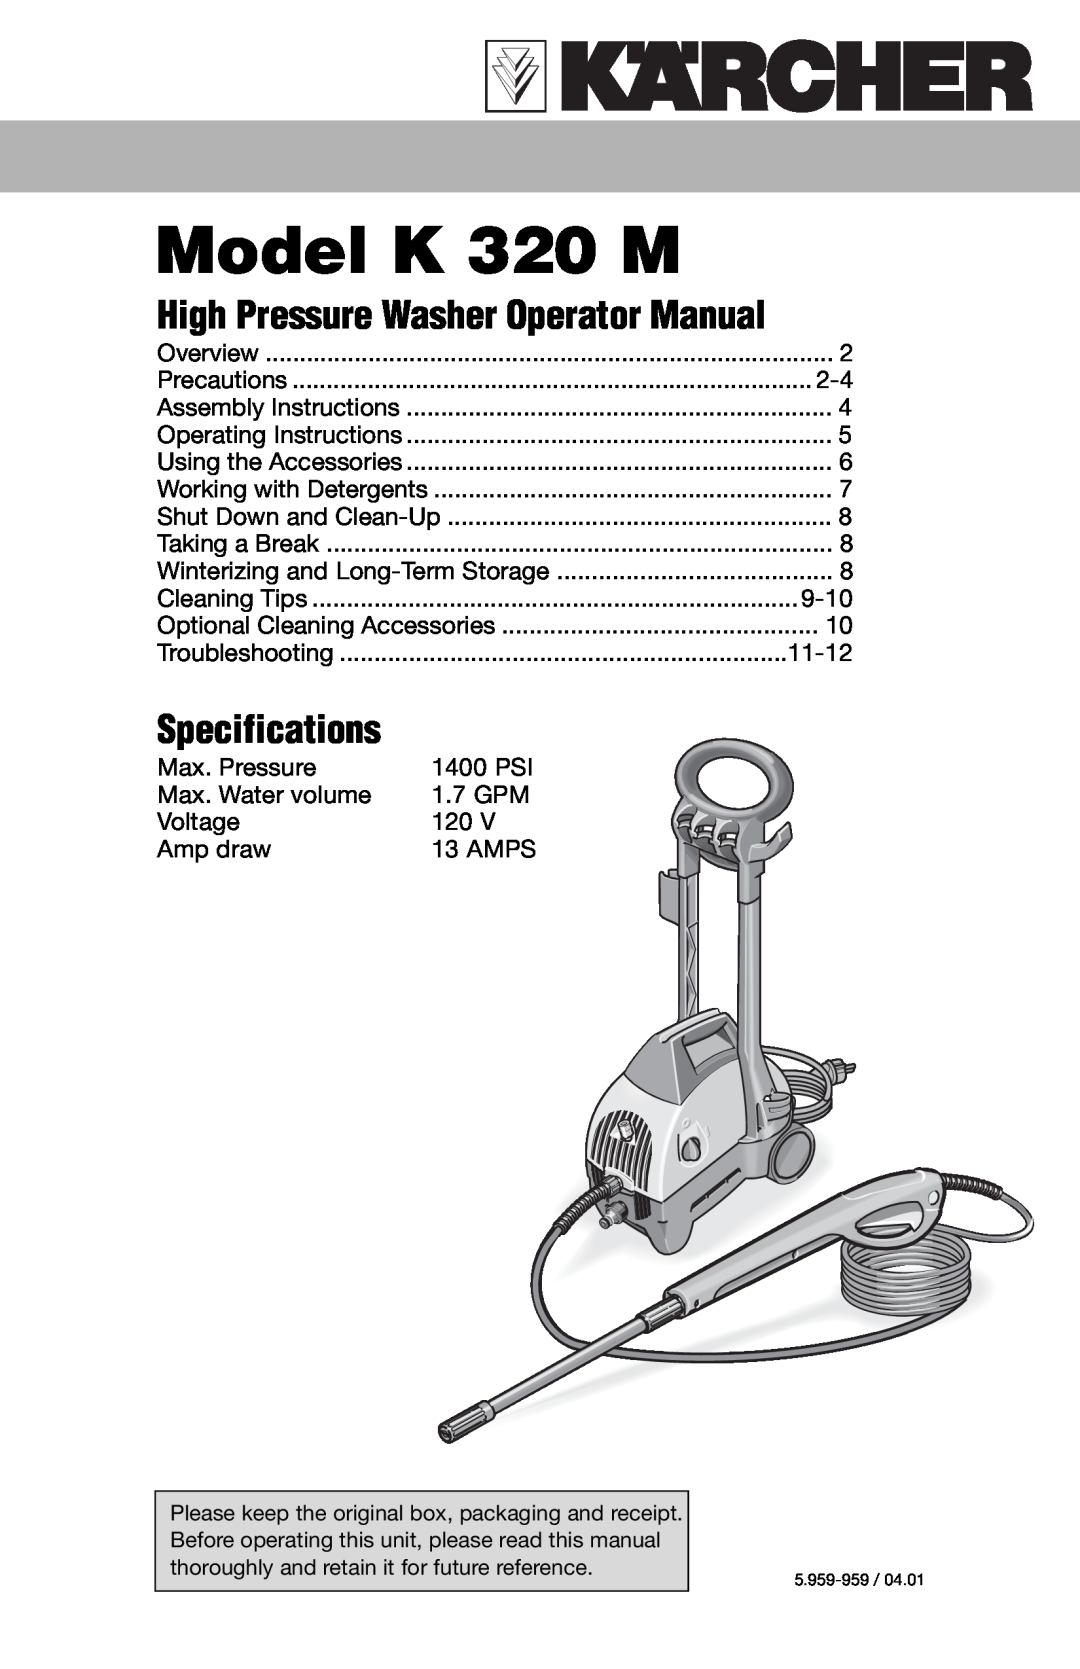 Karcher specifications High Pressure Washer Operator Manual, Model K 320 M, Specifications 